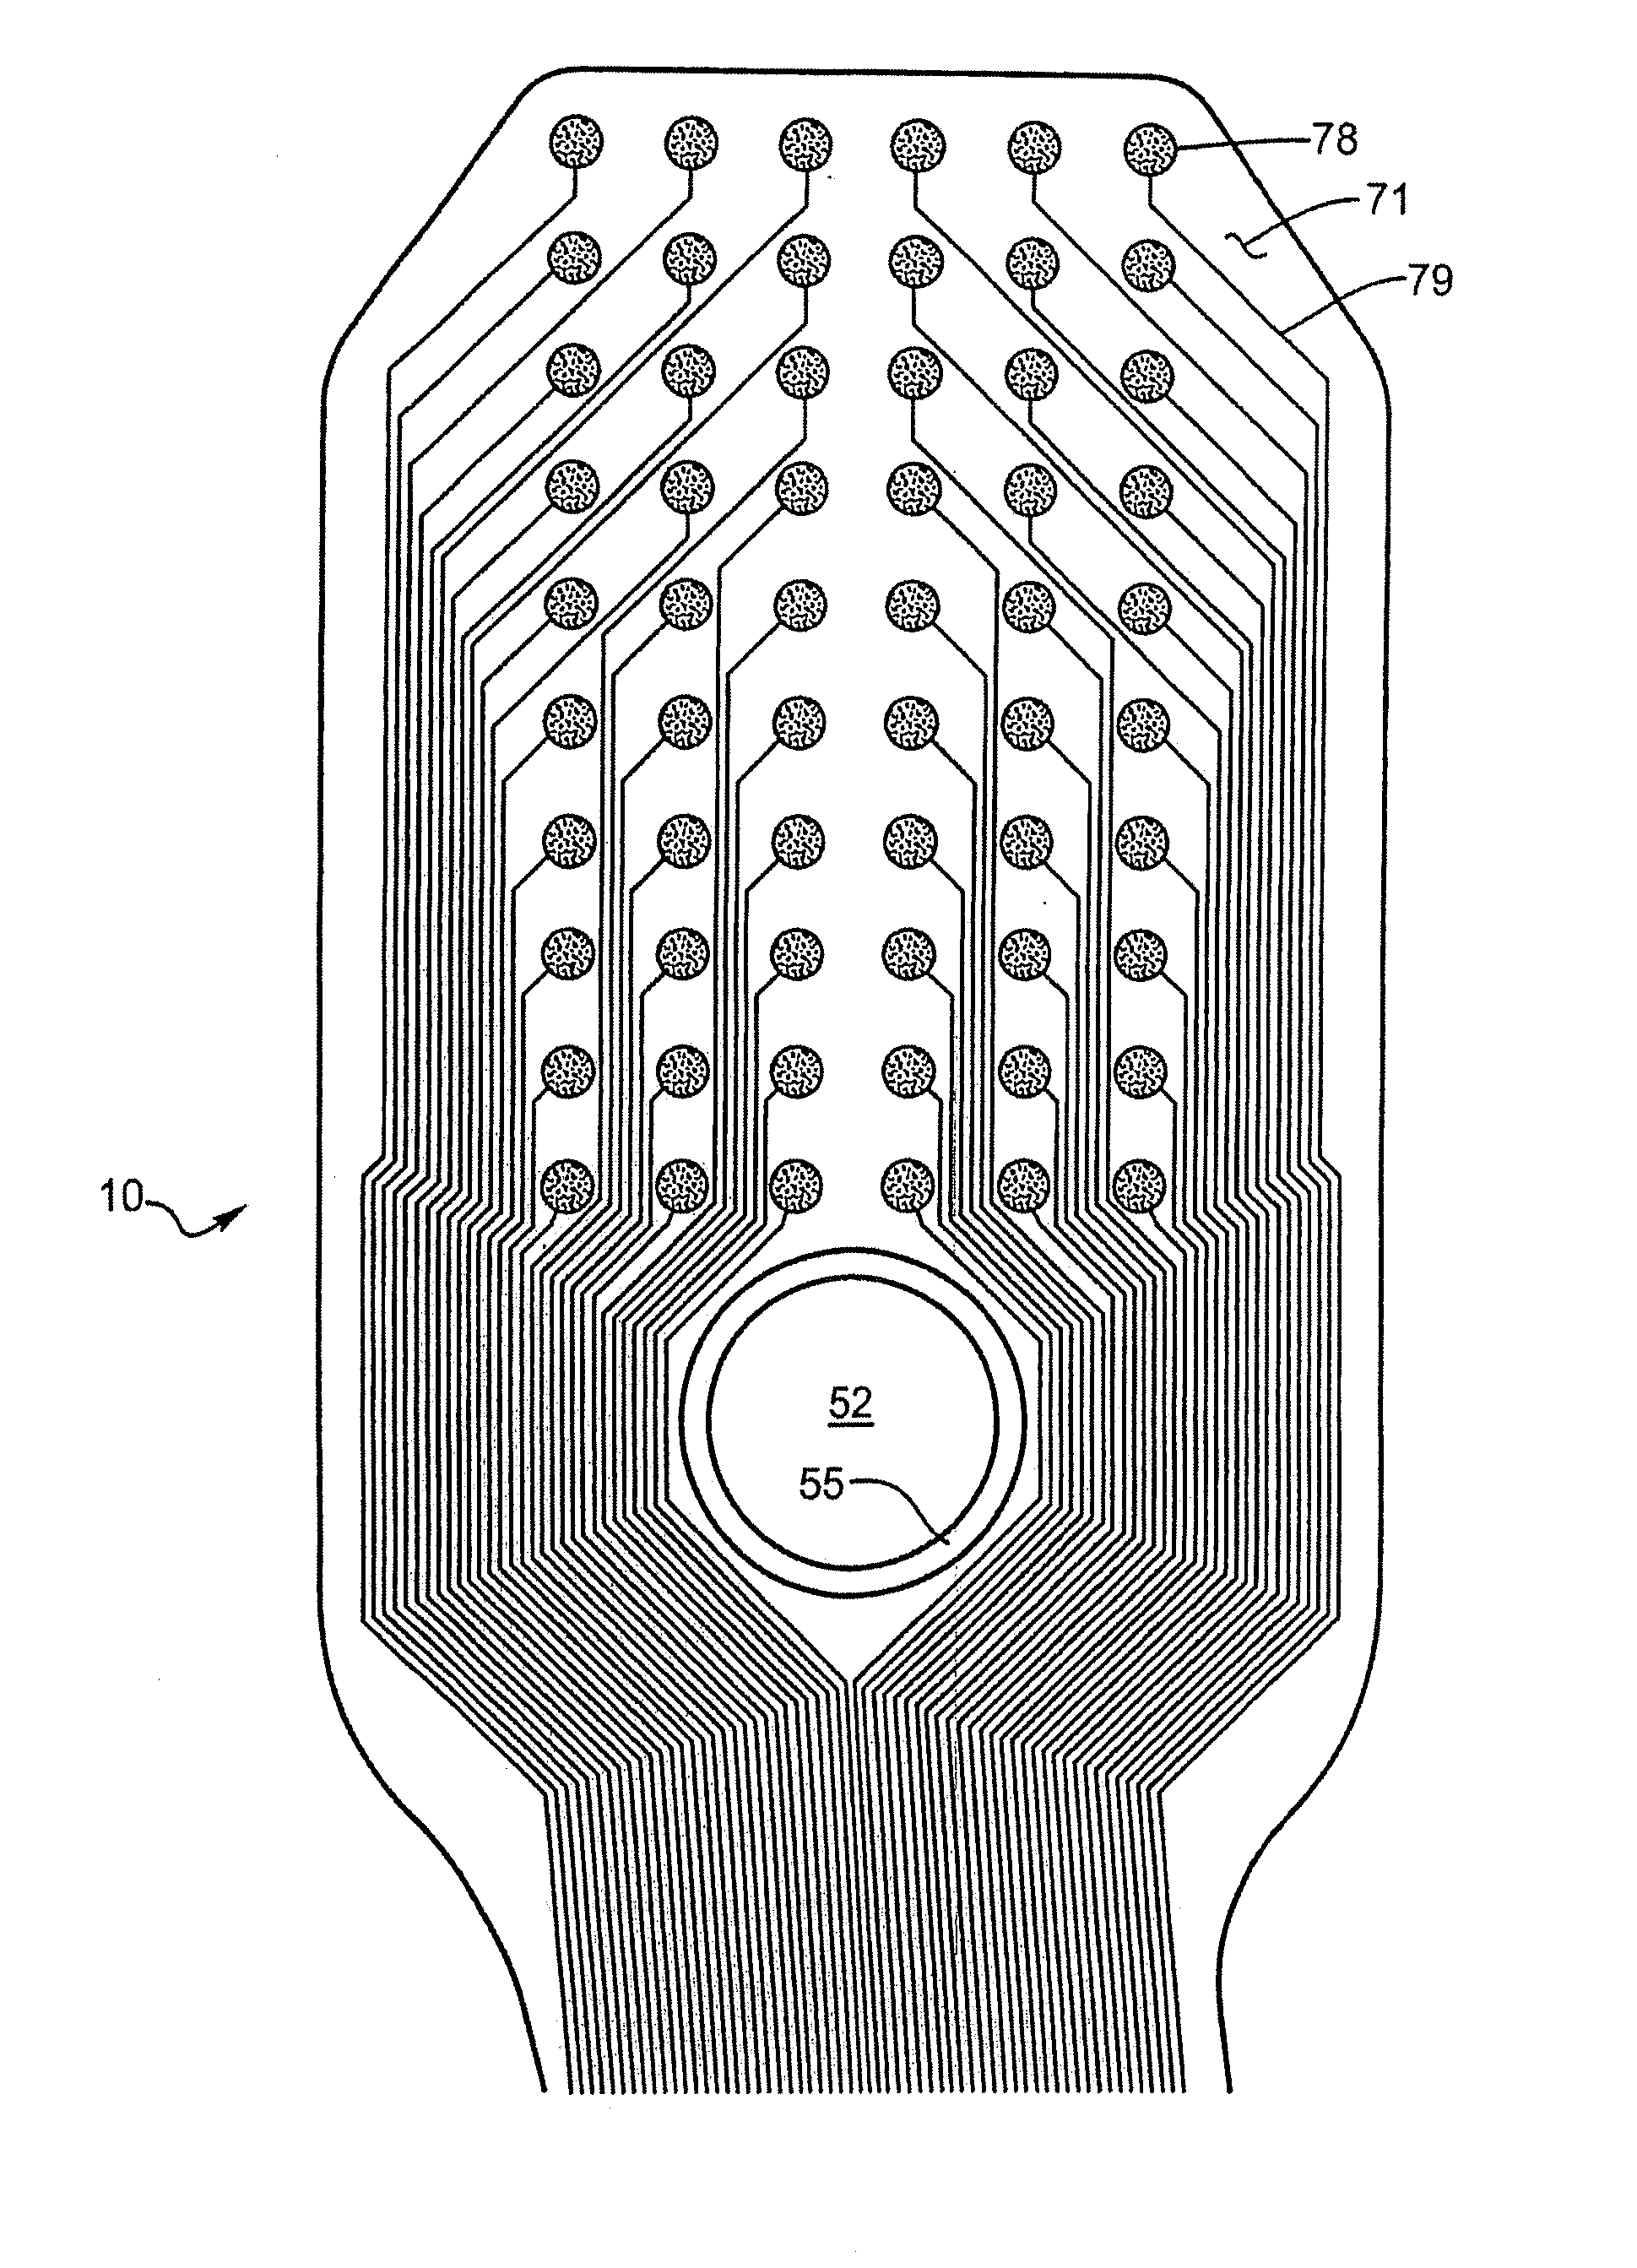 Method of Manufacturing a Flexible Circuit Electrode Array